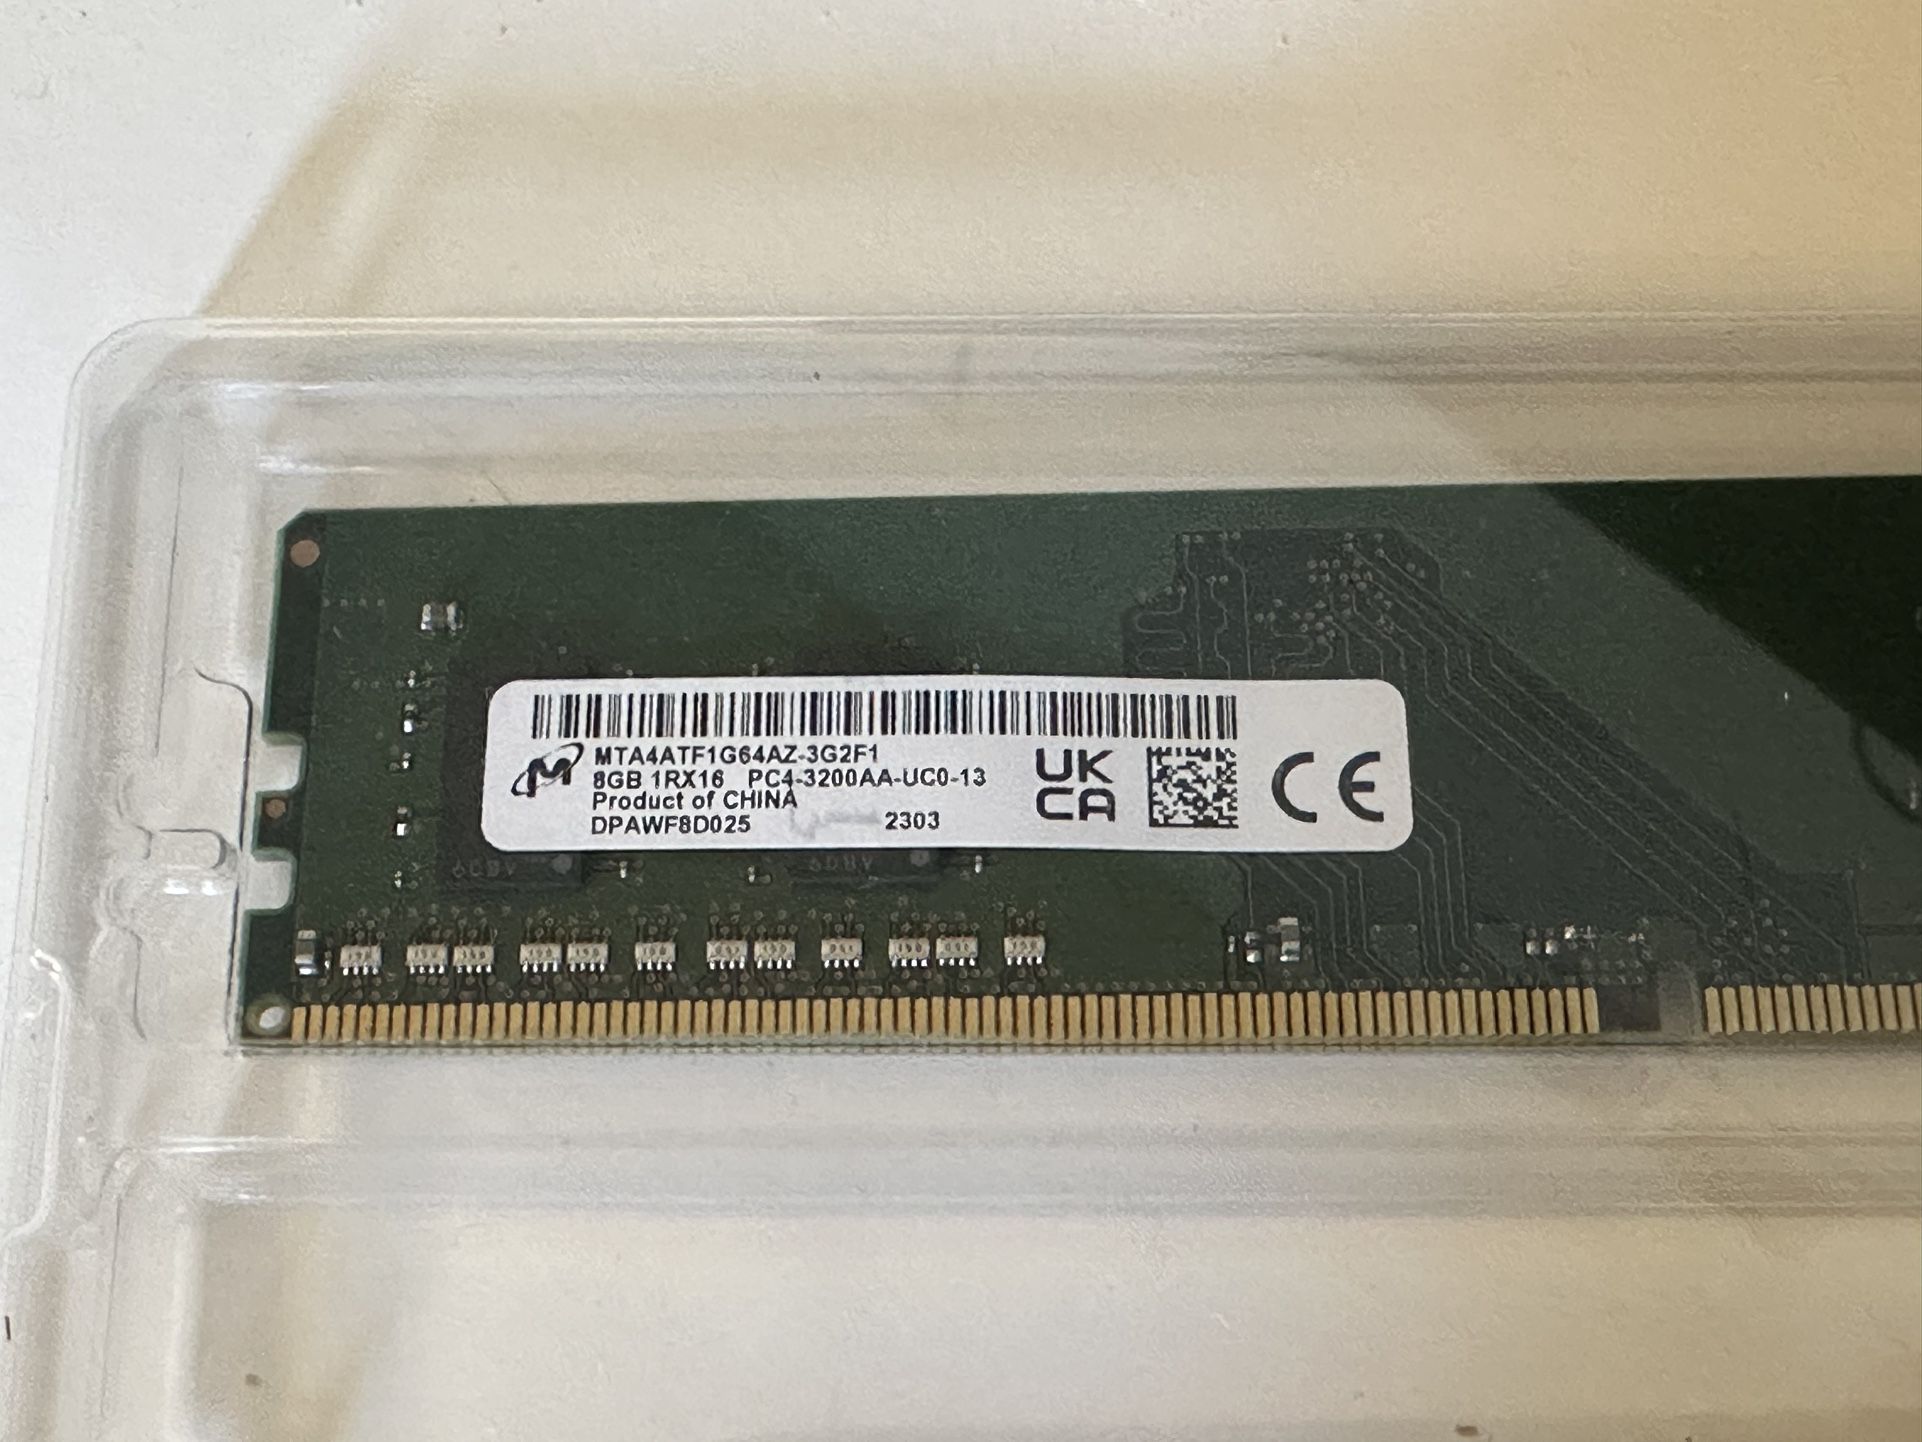 8 GB DD4 3200MHz RAM - OEM MicronPC Memory from Dell Inspiron 3020